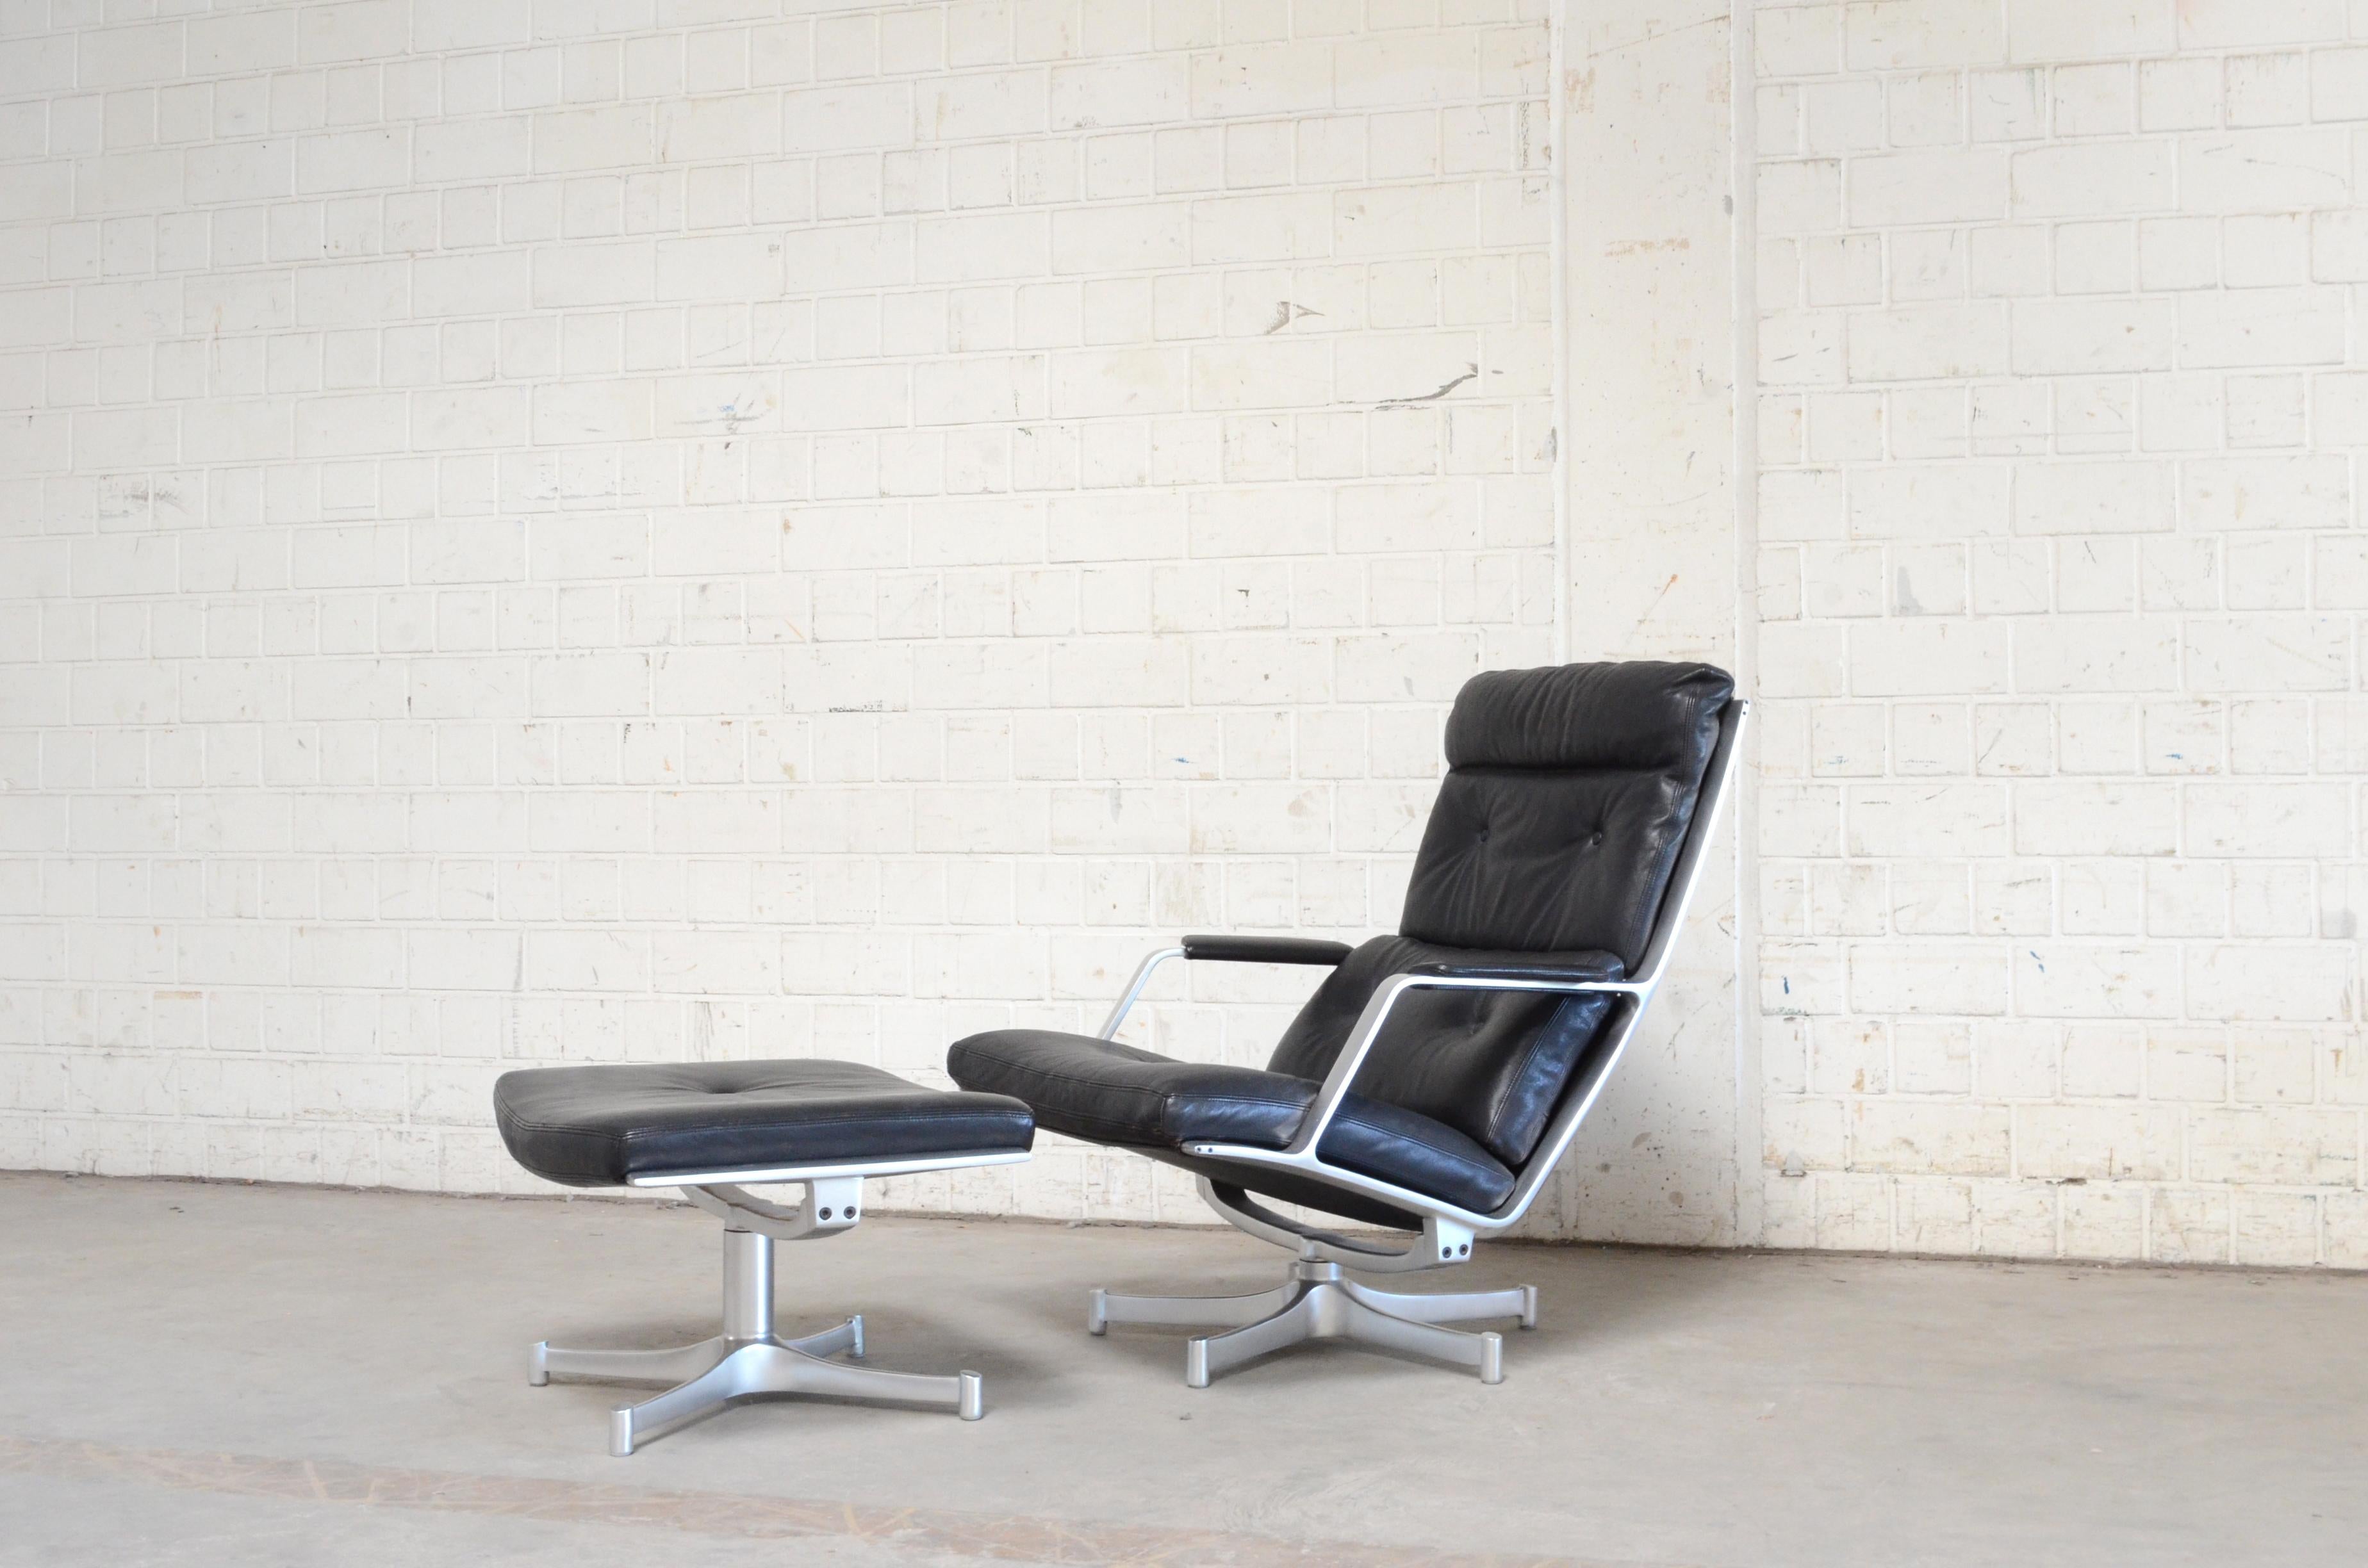 FK 85 was made by Jorgen Kastholm & Preben Fabricius for Kill International
The lounge chair and ottoman has a swivel aluminum frame and a fine black premium aniline leather.
with a beautiful soft touch.
It´s in a beautiful original